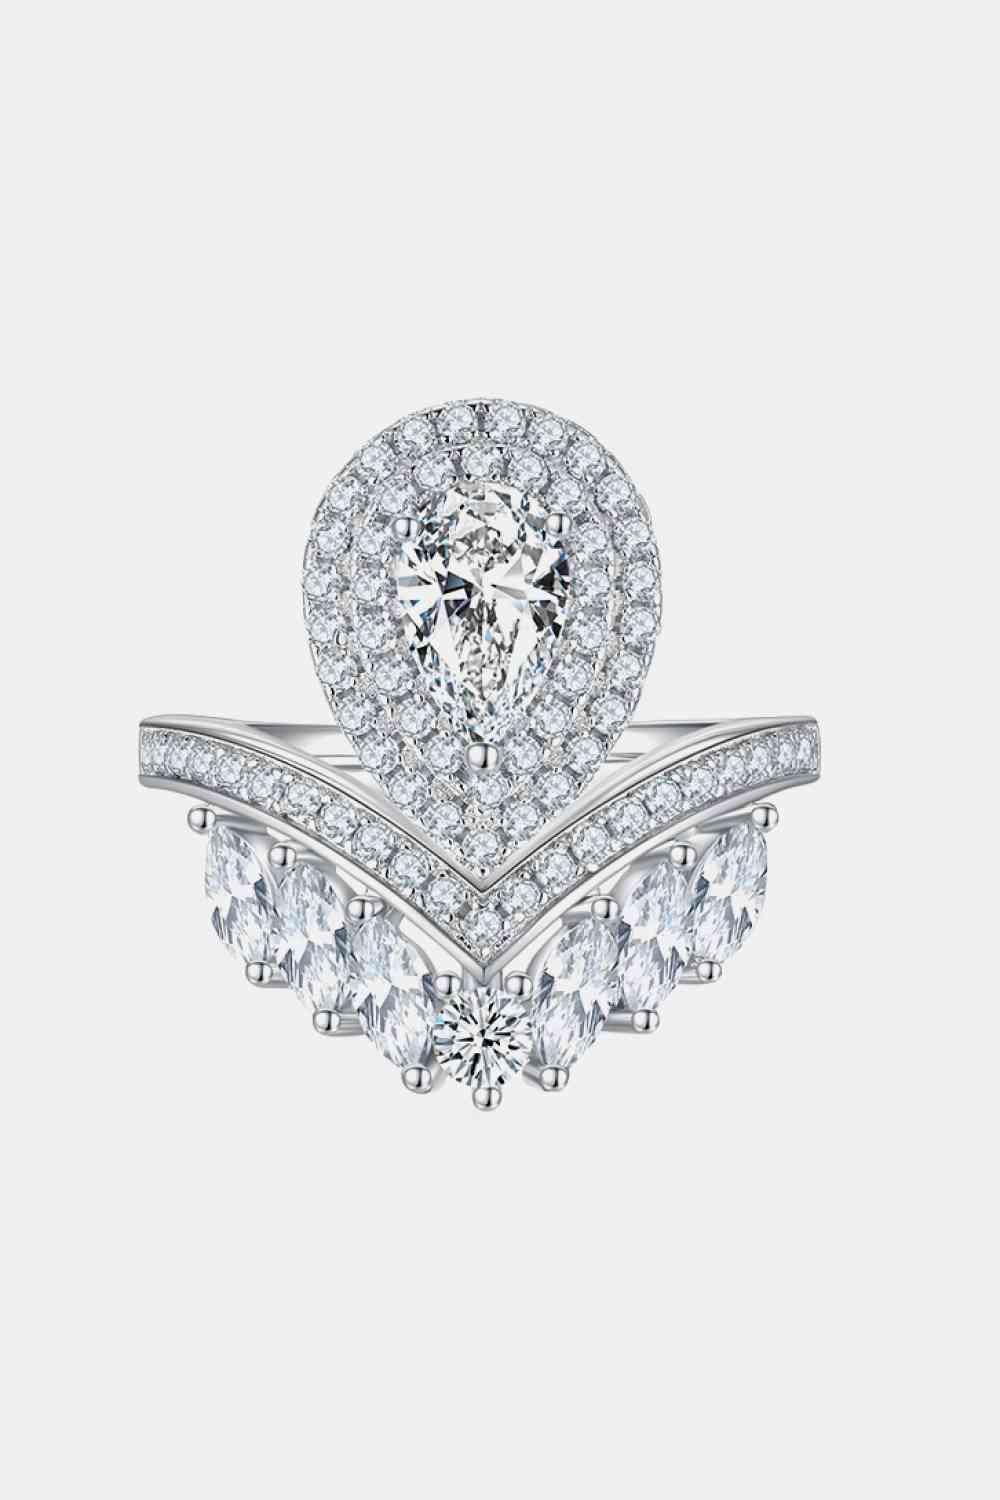 a ring with a pear shaped diamond surrounded by smaller pear shaped diamonds